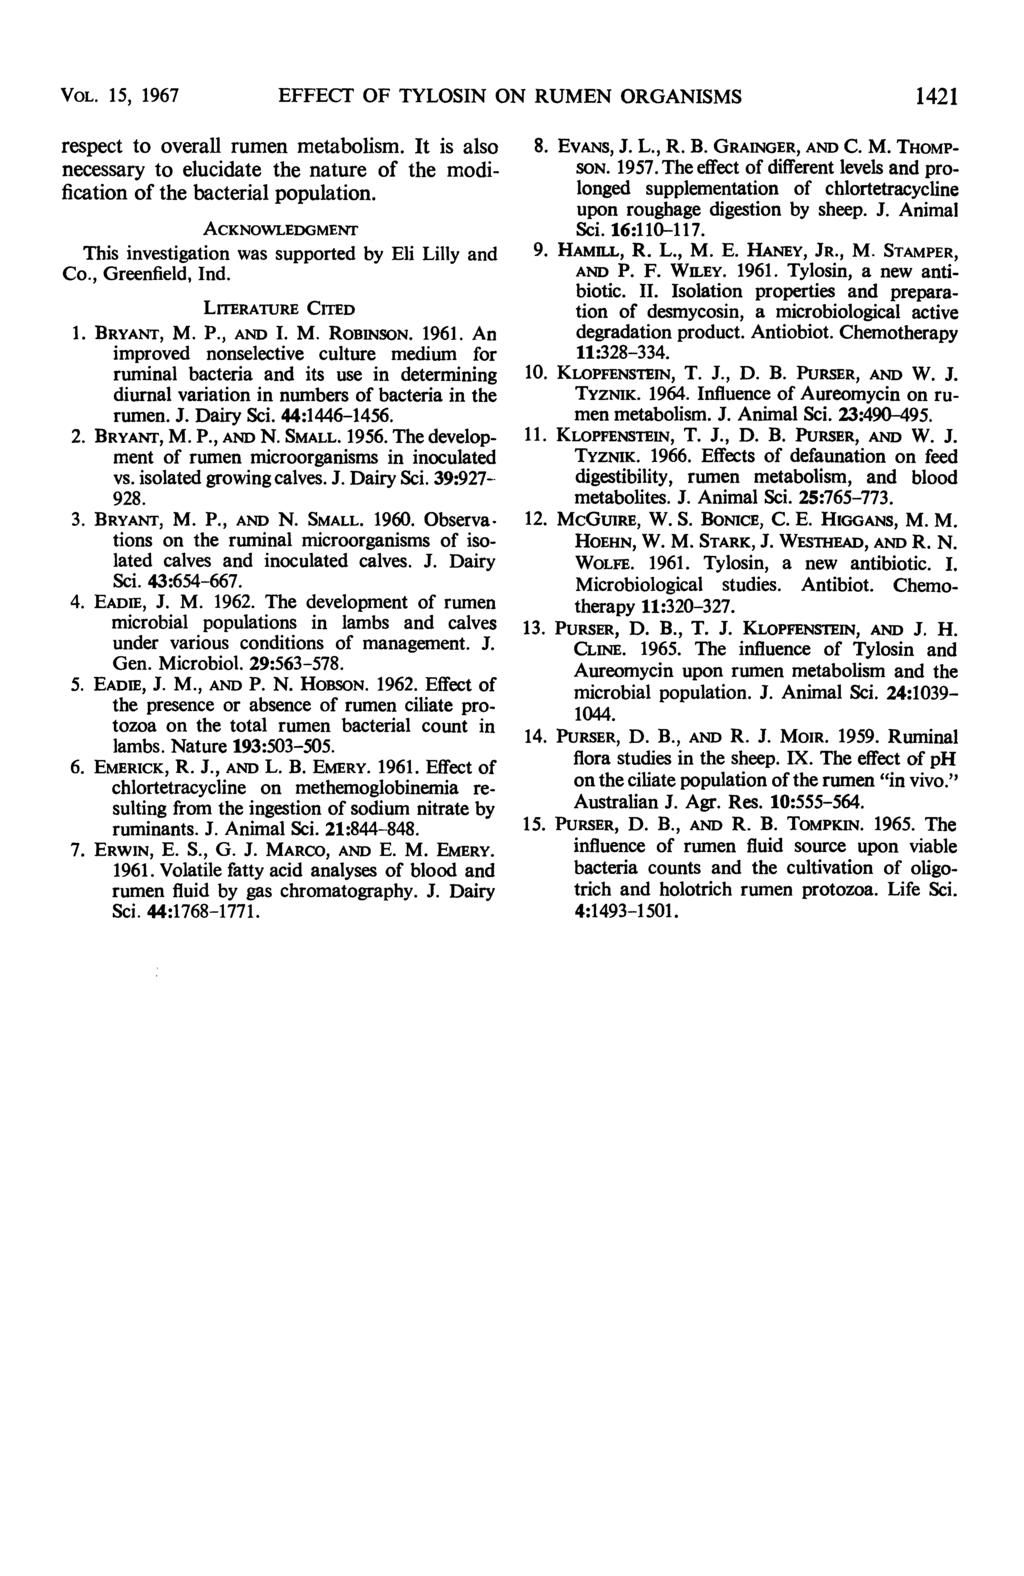 VOL. 15, 1967 EFFECT OF TYLOSIN ON RUMEN ORGANISMS 1421 respect to overall rumen metabolism. It is also necessary to elucidate the nature of the modification of the bacterial population.